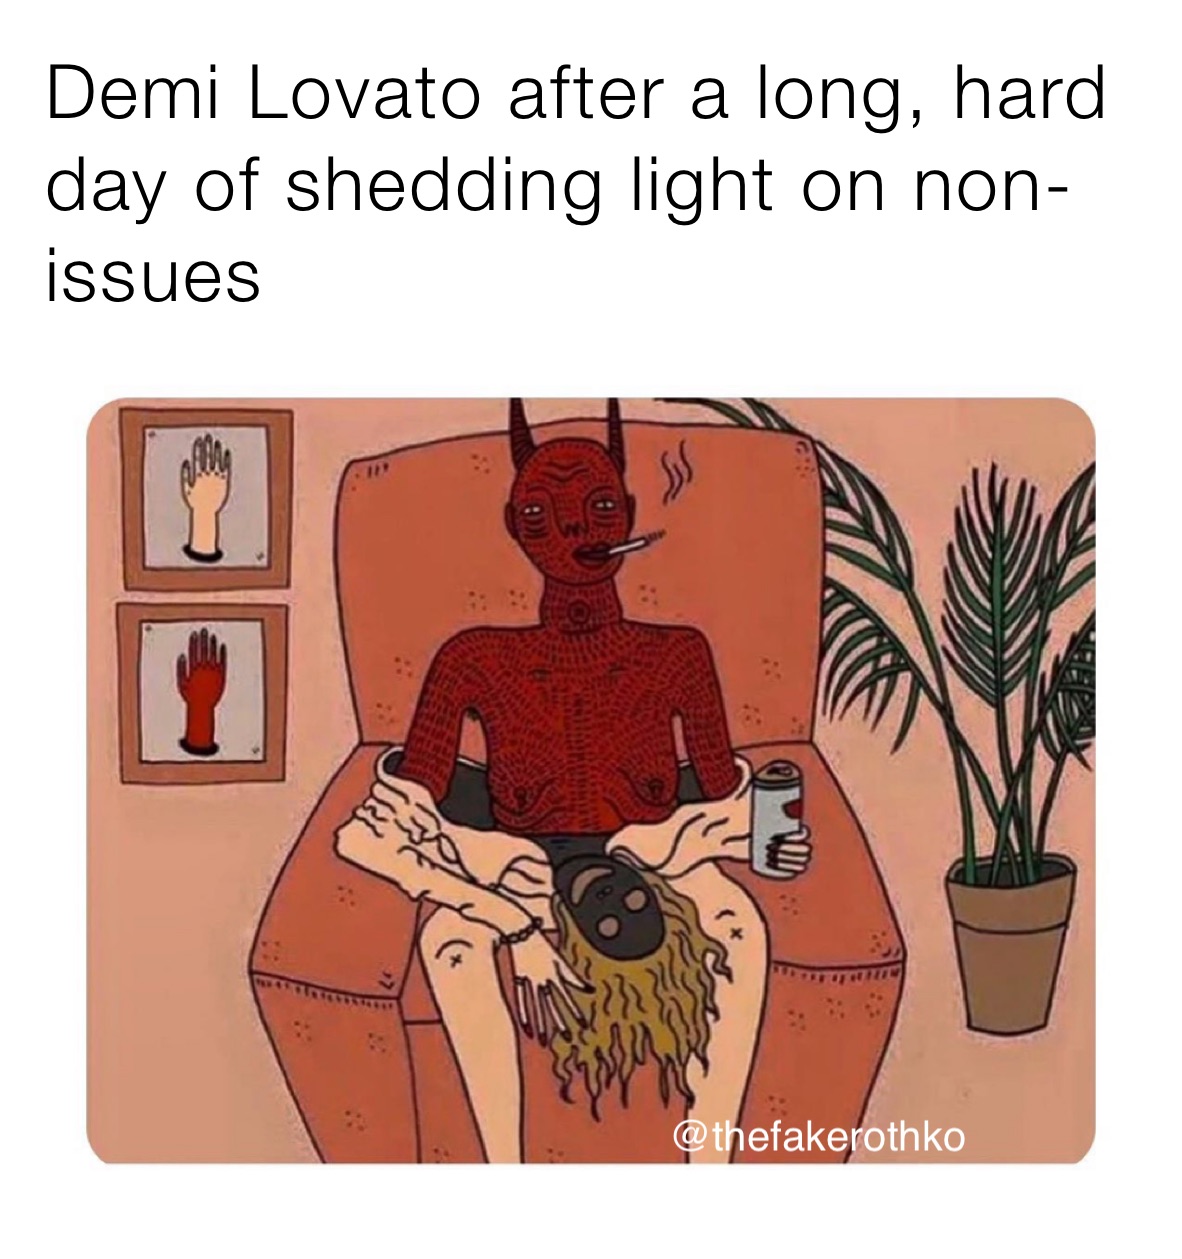 Demi Lovato after a long, hard day of shedding light on non-issues 